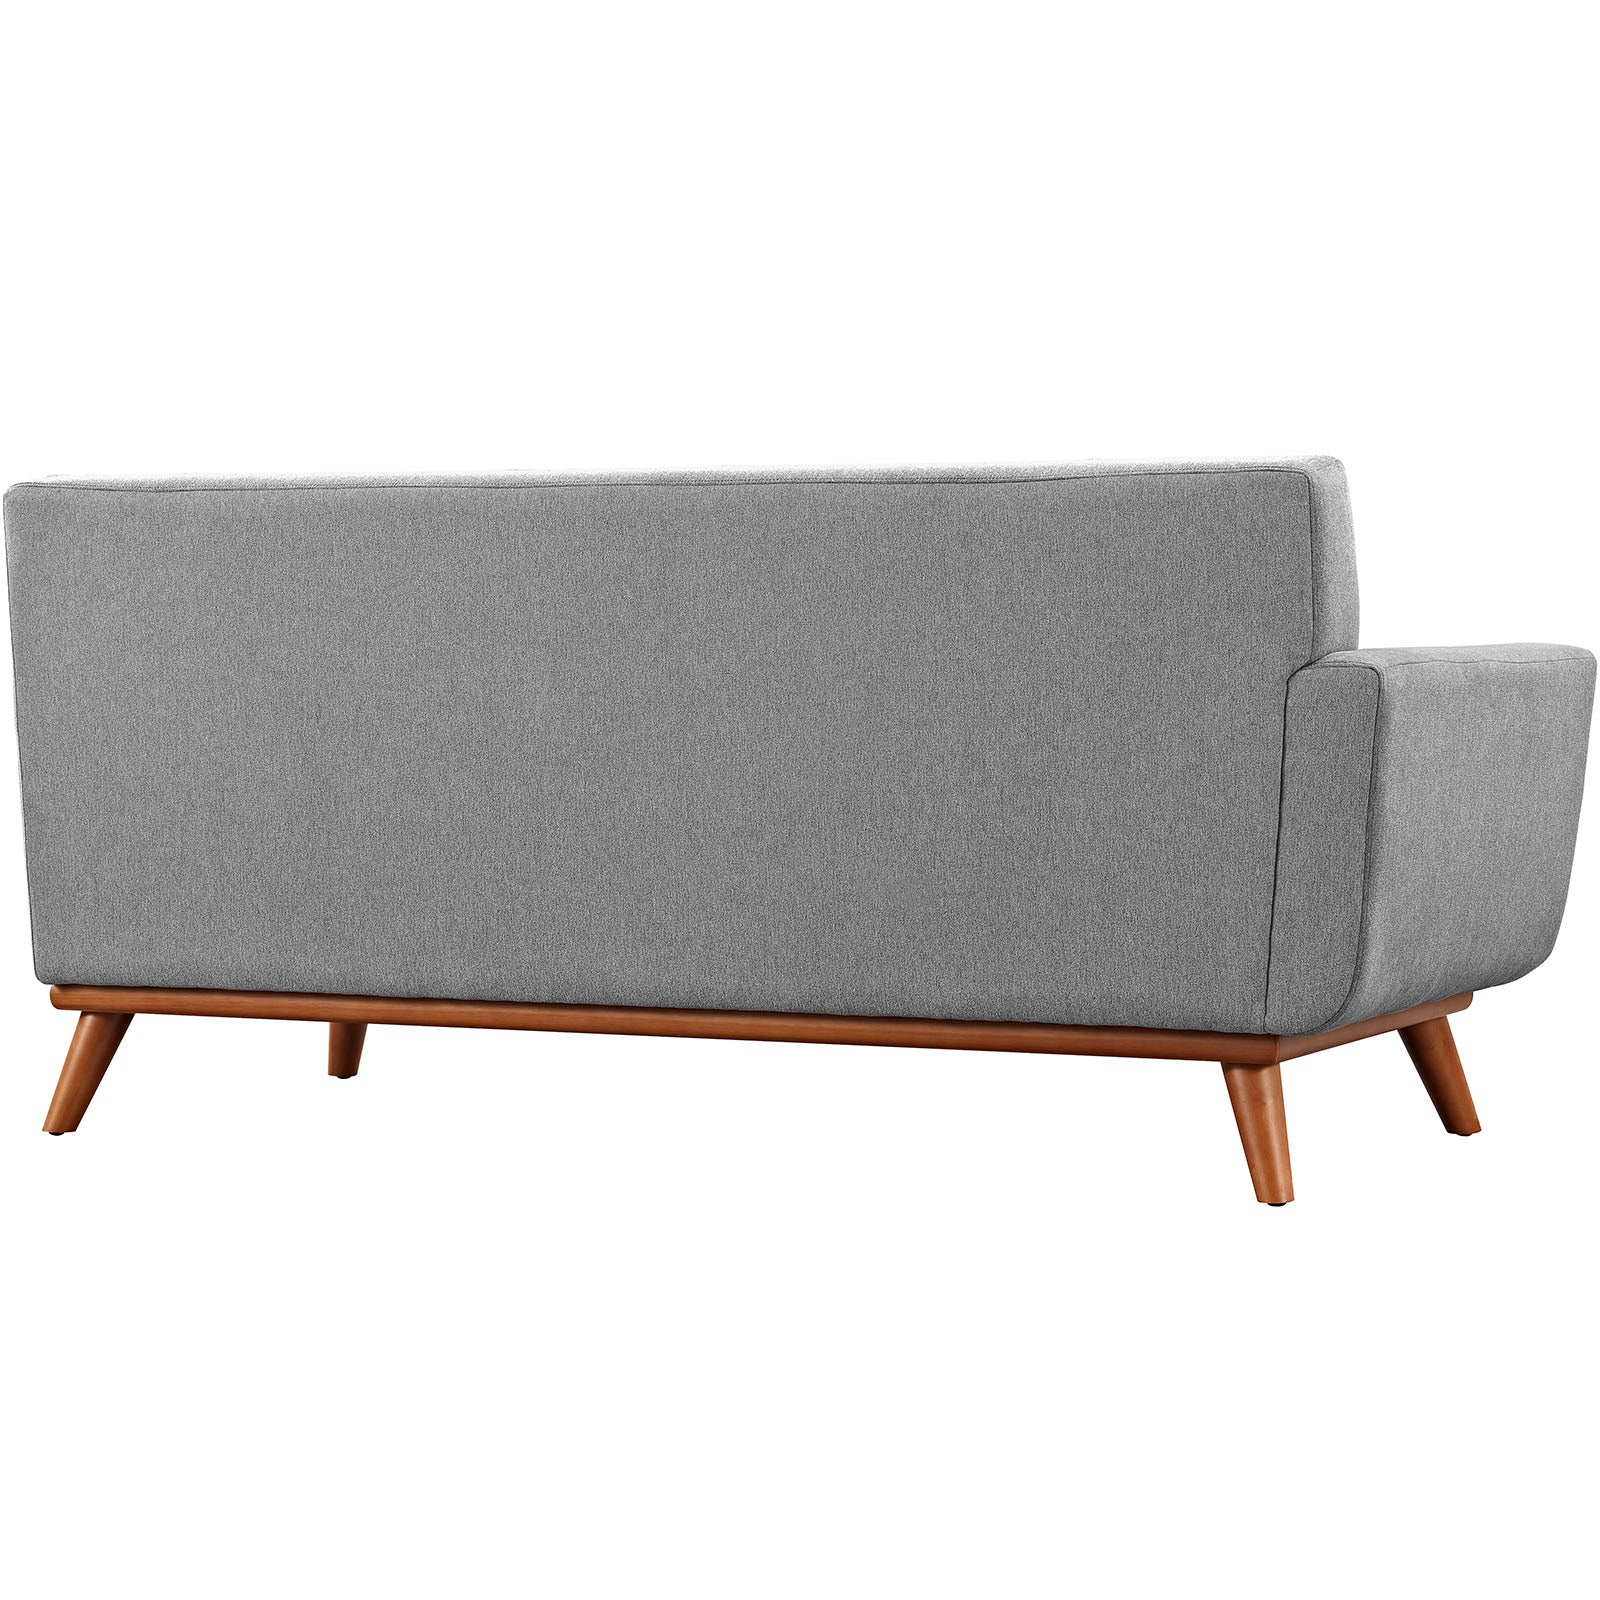 Engage 5 Piece Sectional Sofa-Sectional-Modway-Wall2Wall Furnishings